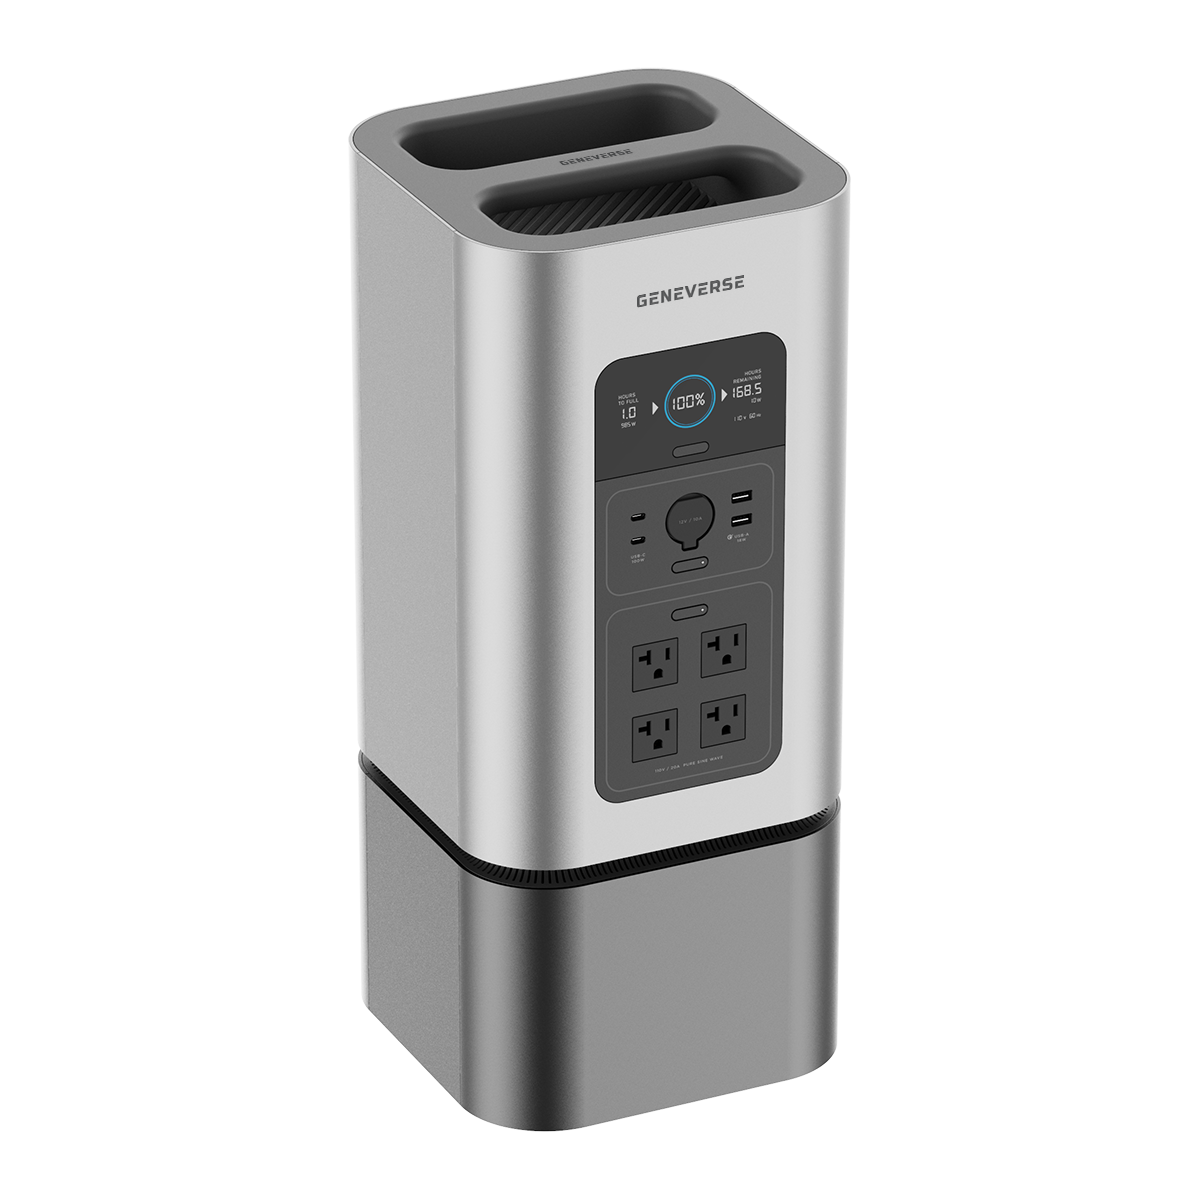 Geneverse HomePower 2 Backup Battery Power Station